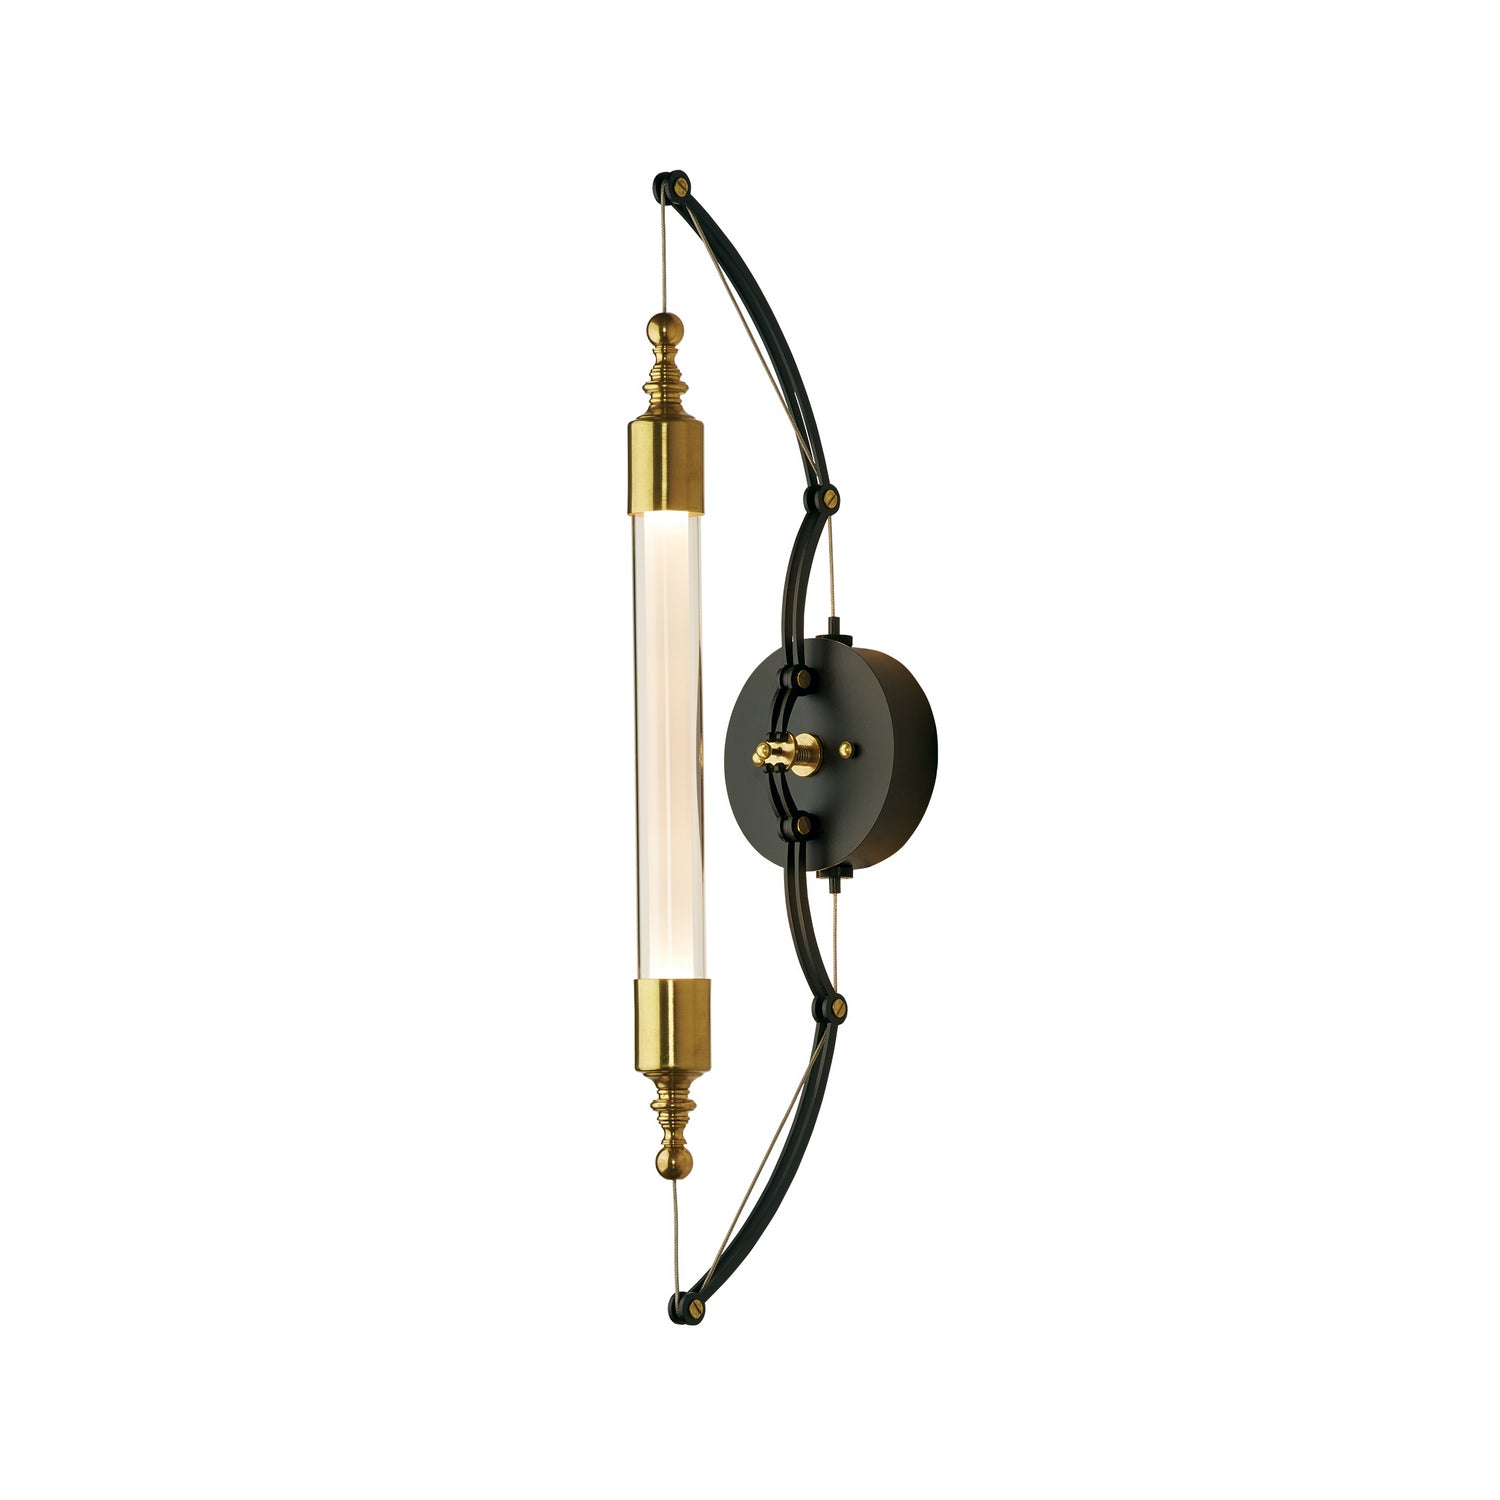 Hubbardton Forge - LED Wall Sconce - Otto - Black with Brass Accents- Union Lighting Luminaires Decor